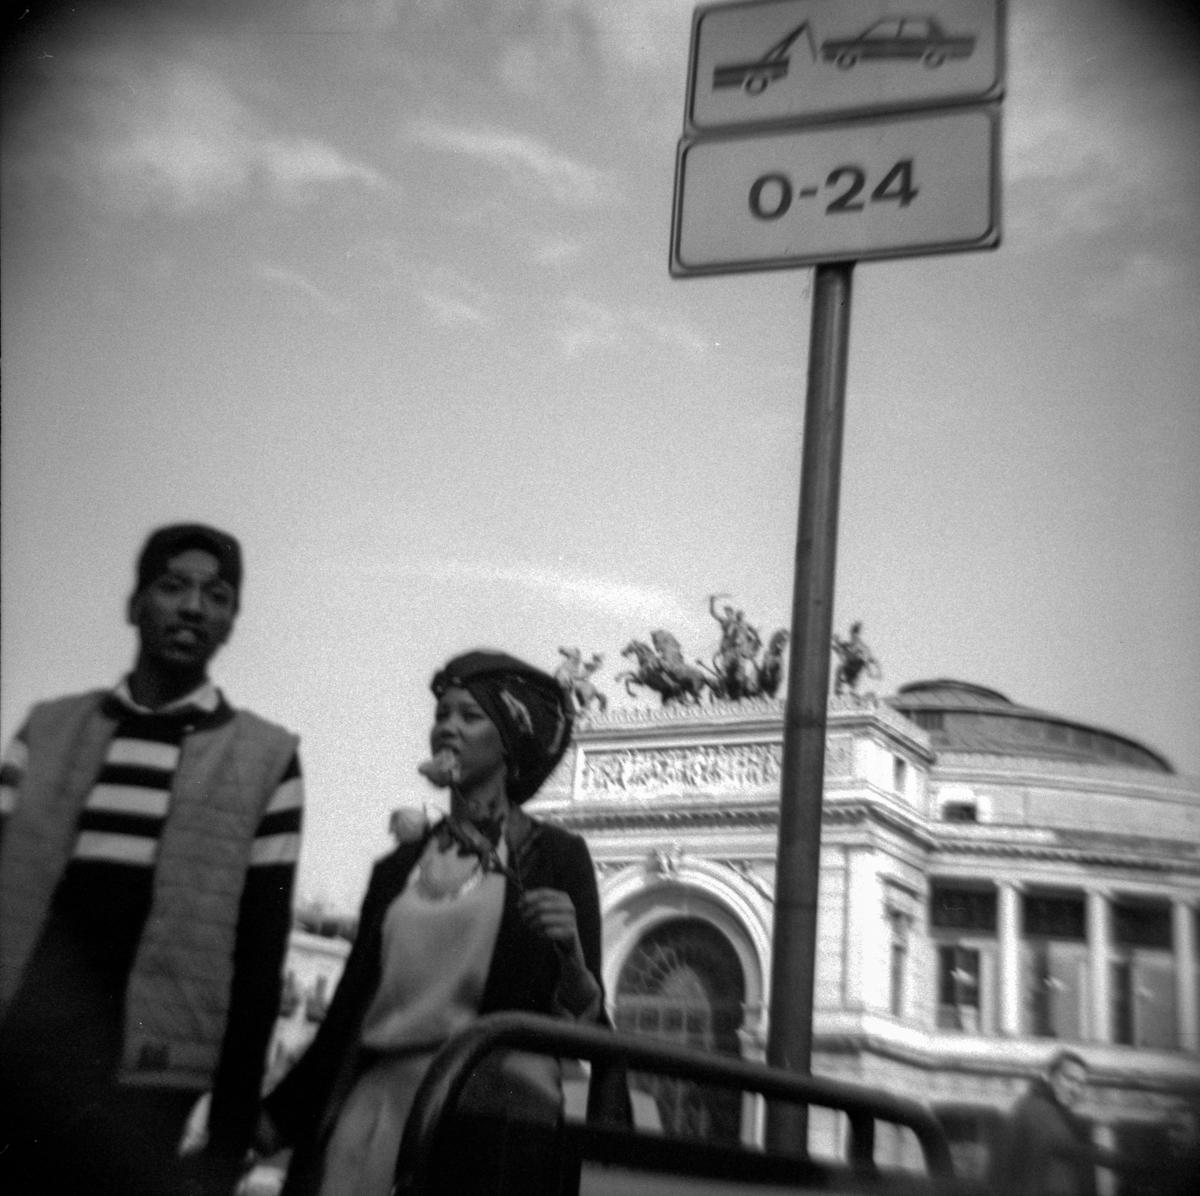 This is #DianaF #streetphotography #lomo #lomography #fomapanfilm #shootfromthehip